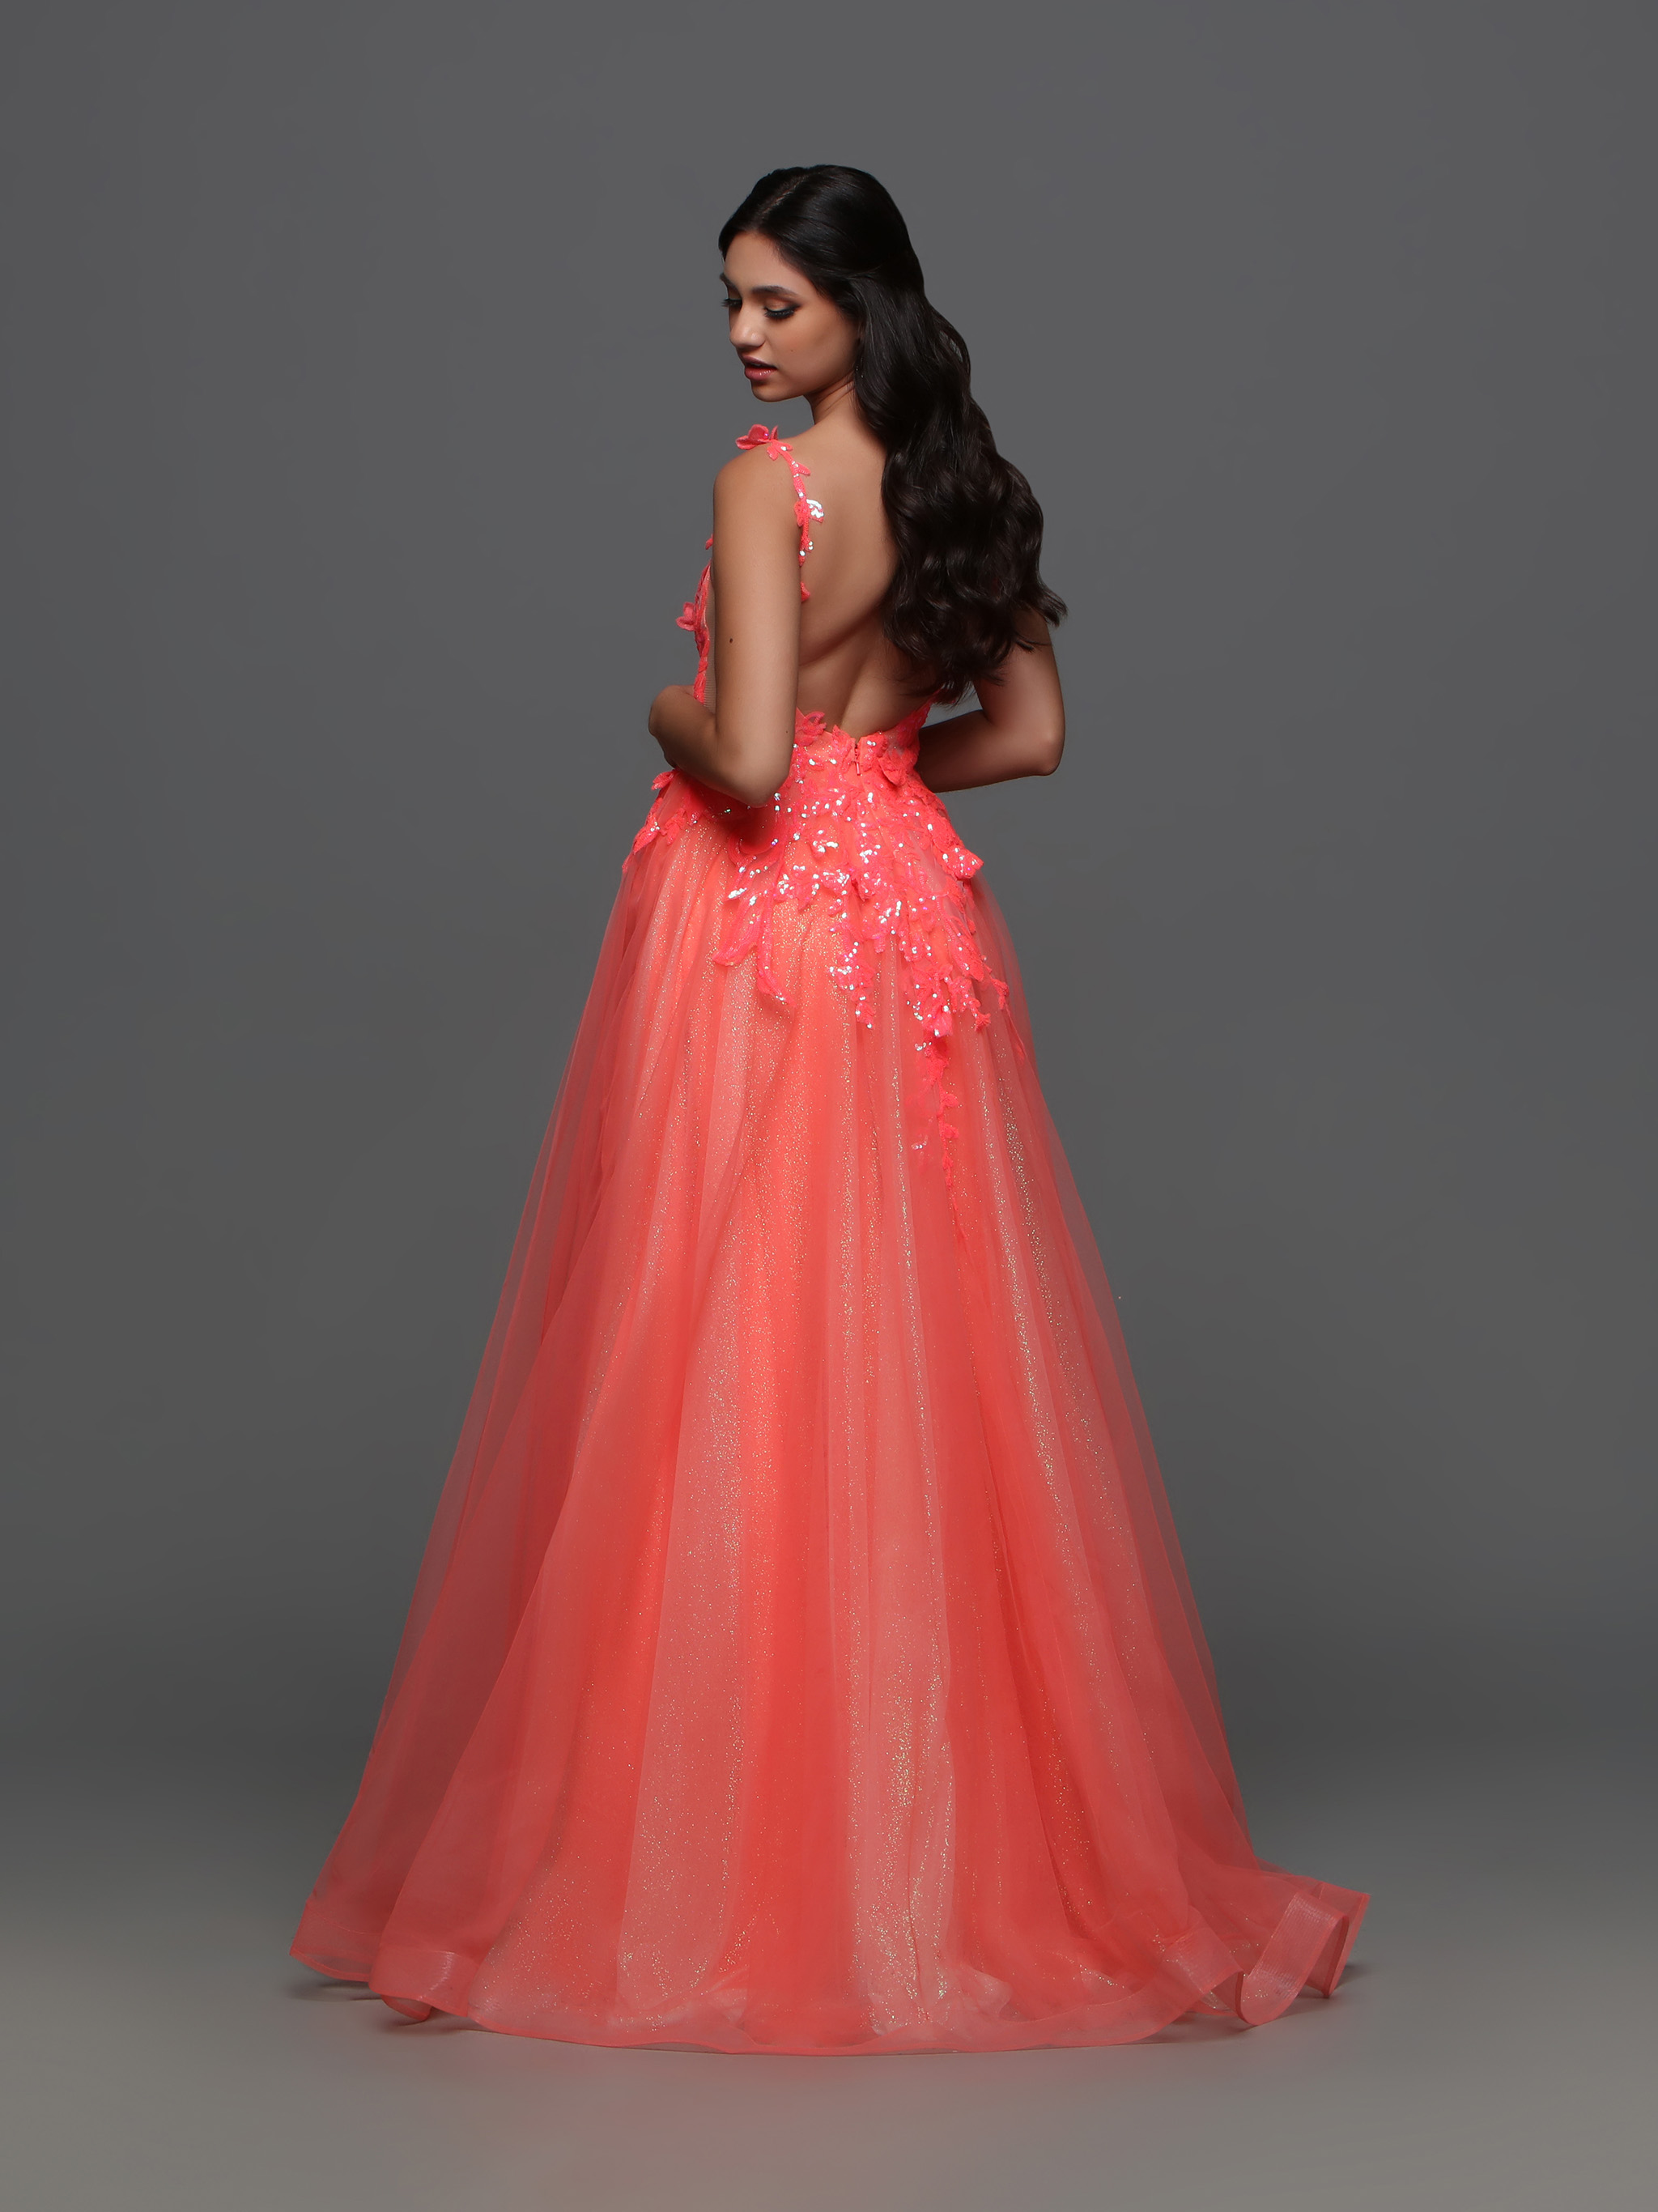 Image showing back view of style #72388